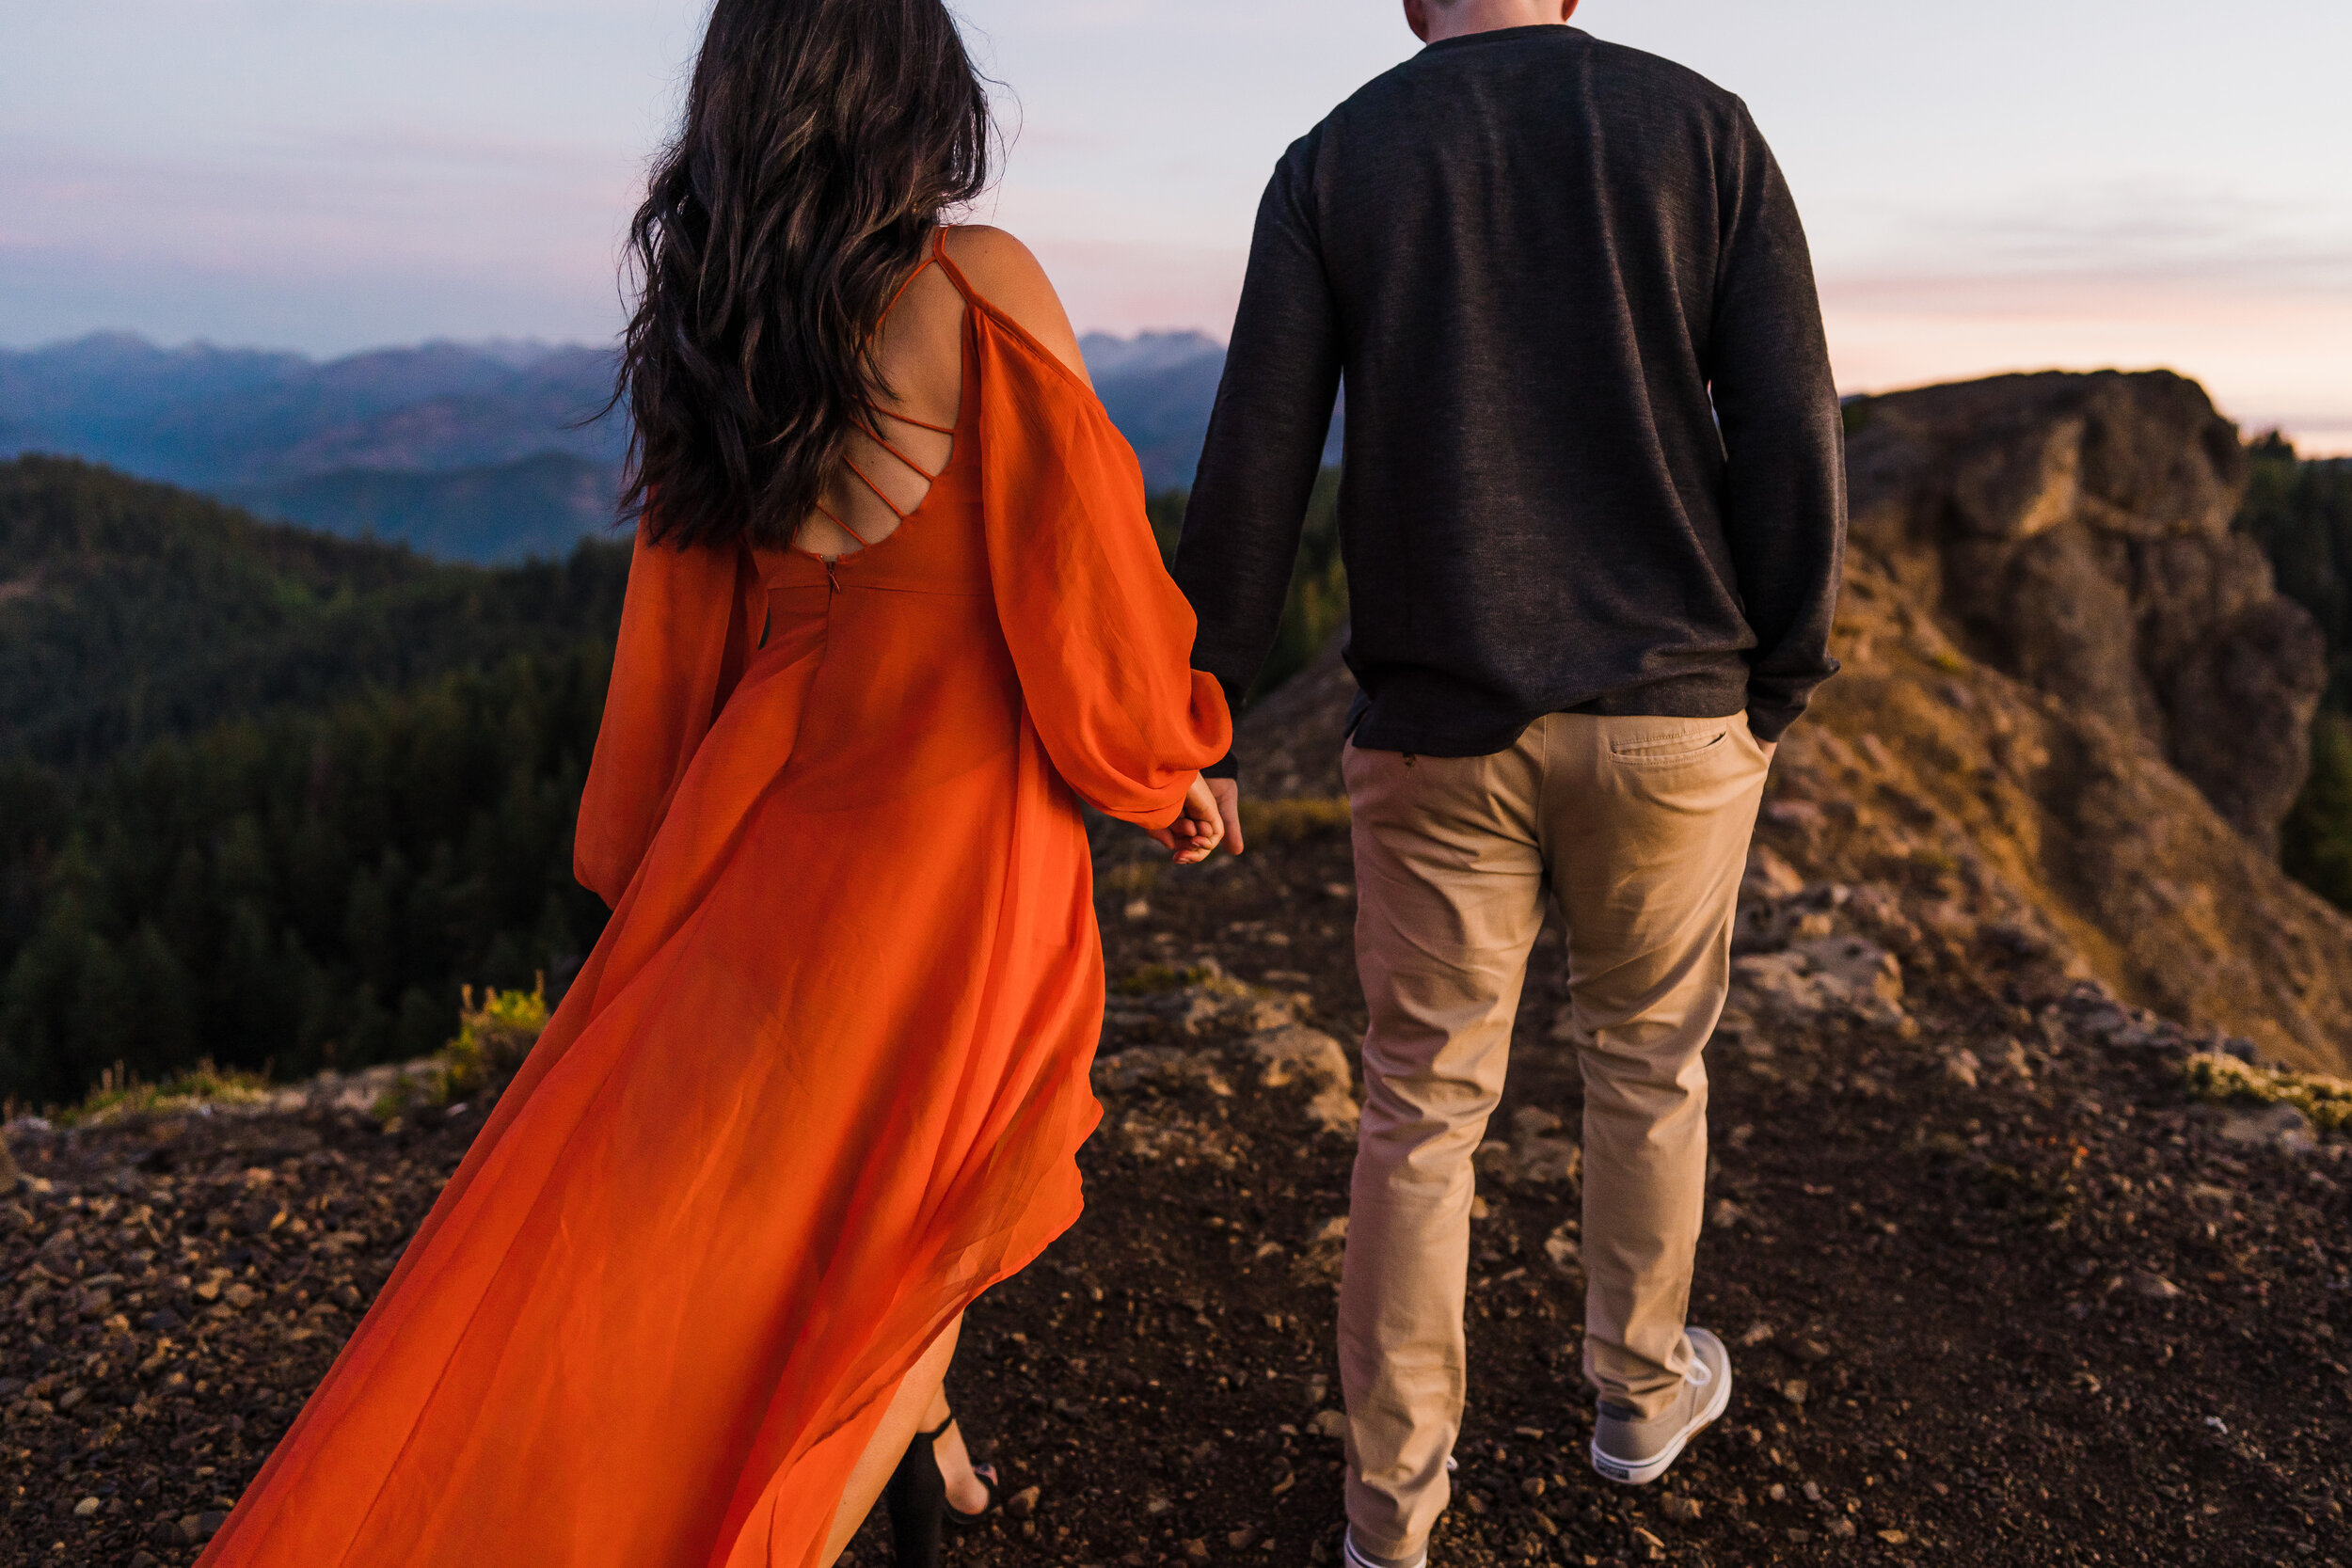 Sunrise Mountain Engagement Photos in the Central Cascades